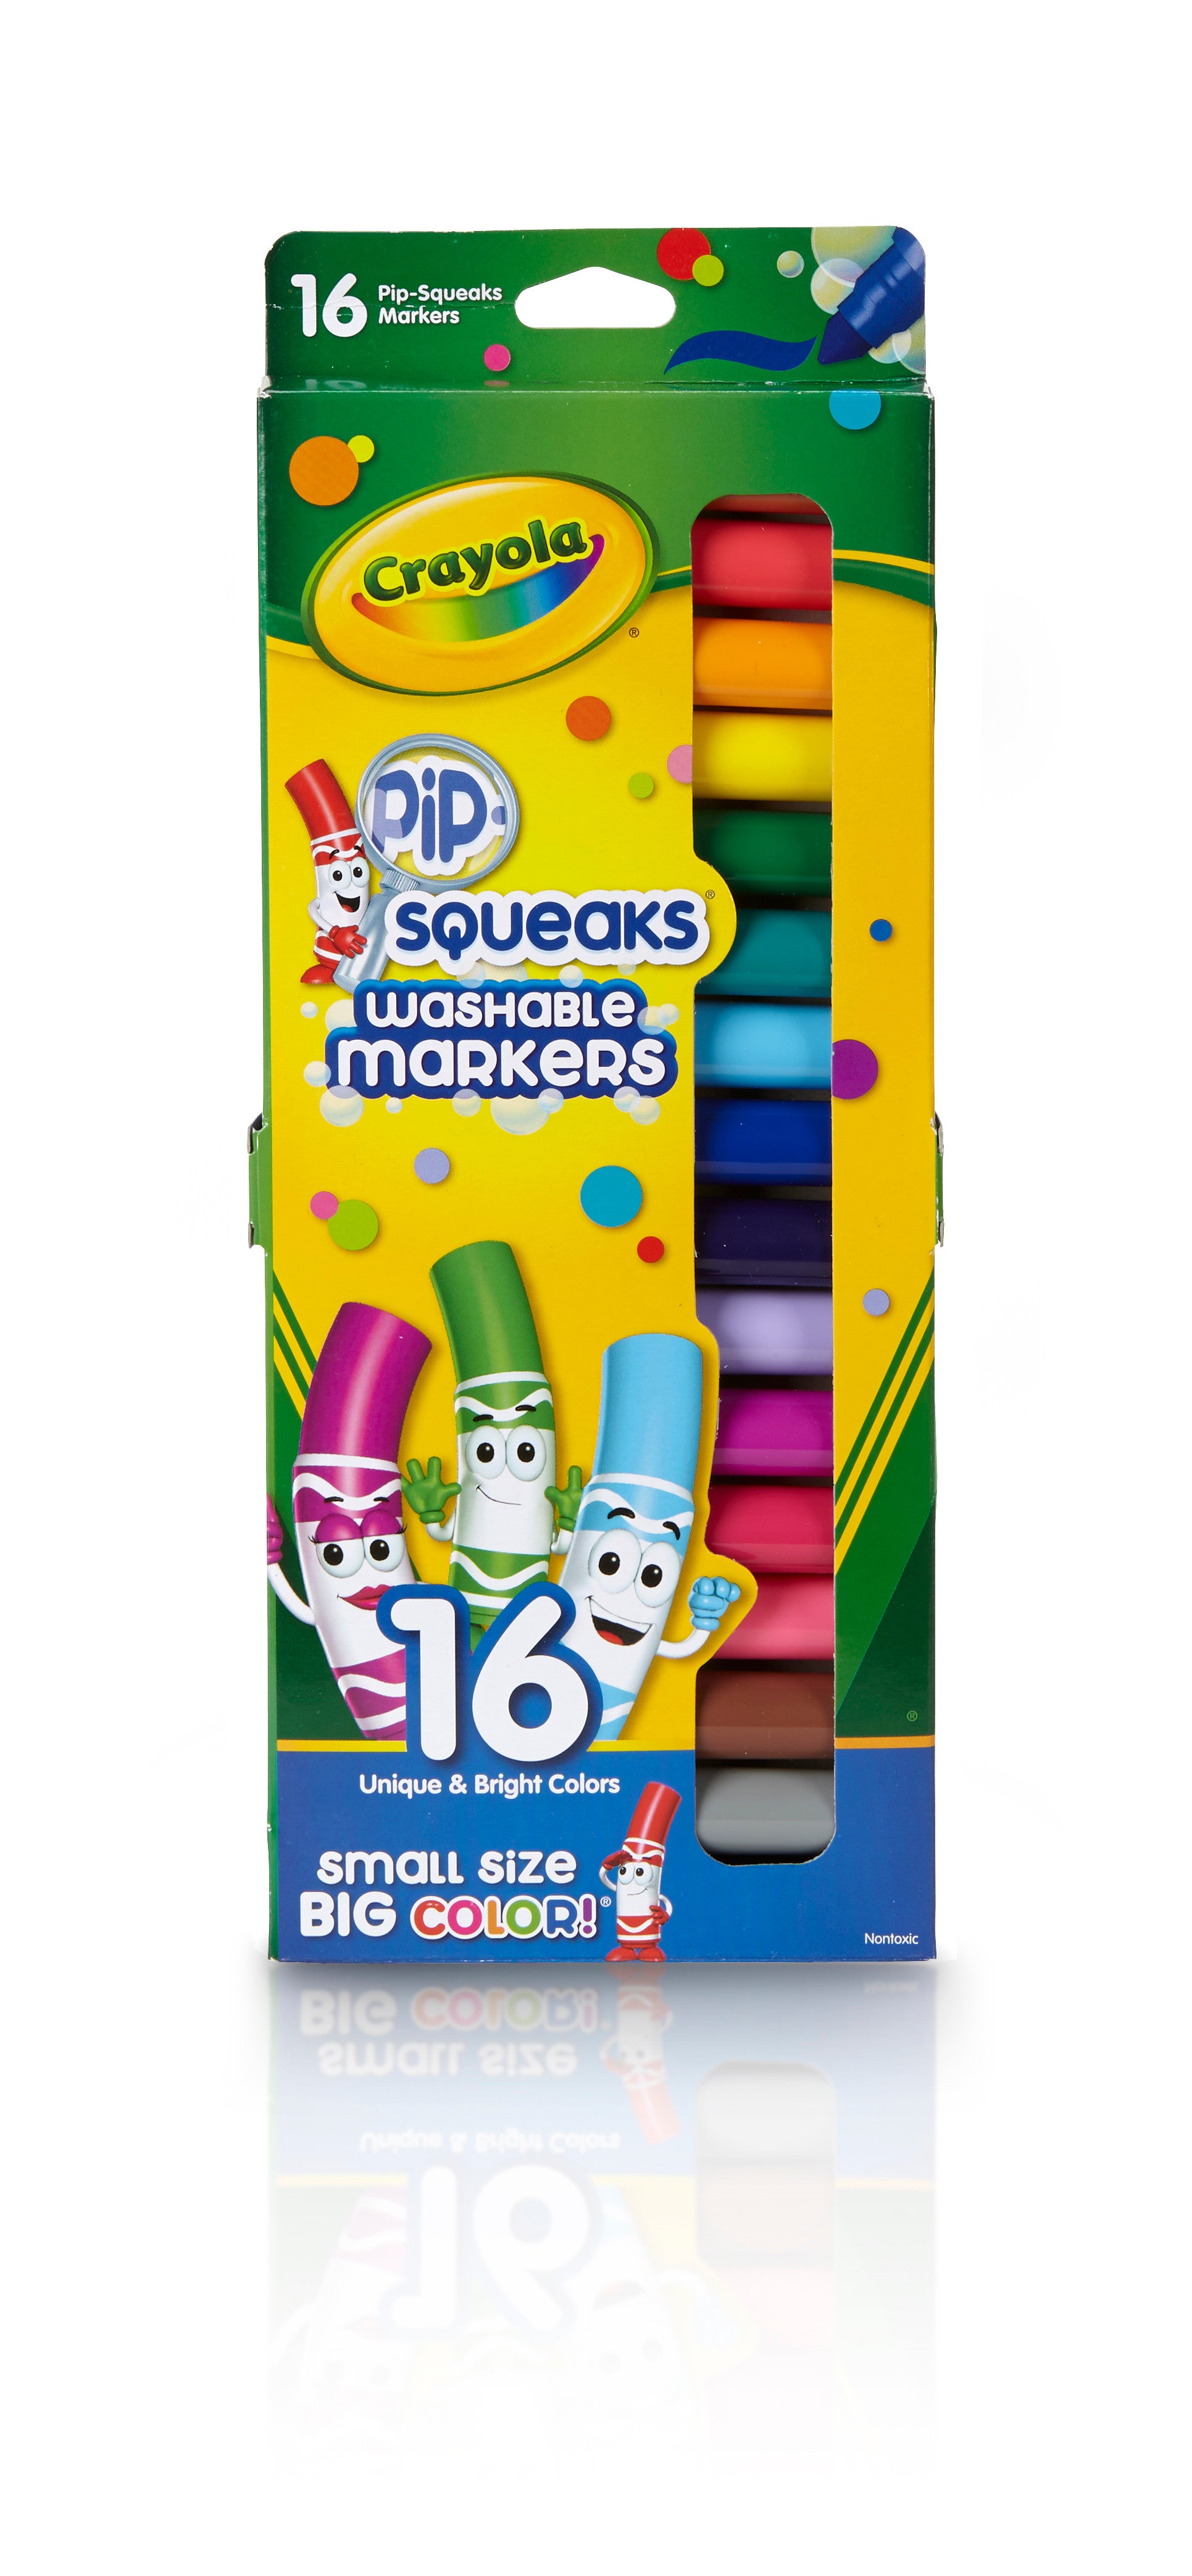 Crayola Pip-Squeaks Washable Markers - 16 Colors